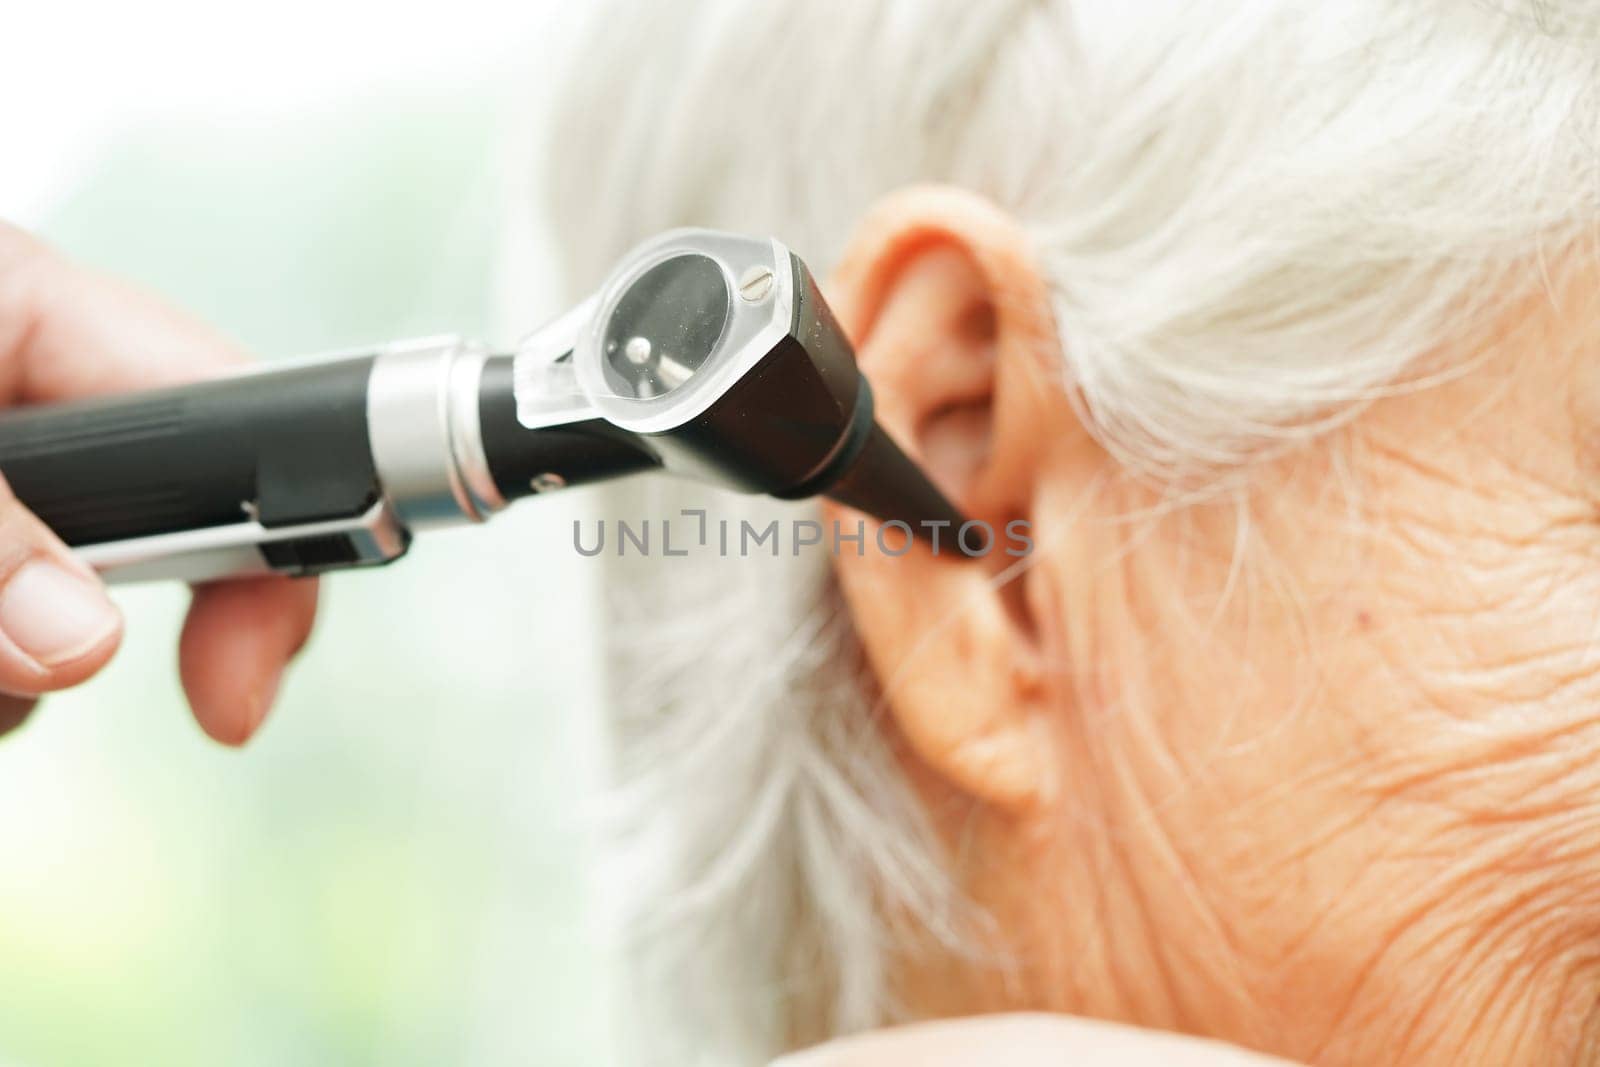 Otolaryngologist or ENT physician doctor examining senior patient ear with otoscope, hearing loss problem.